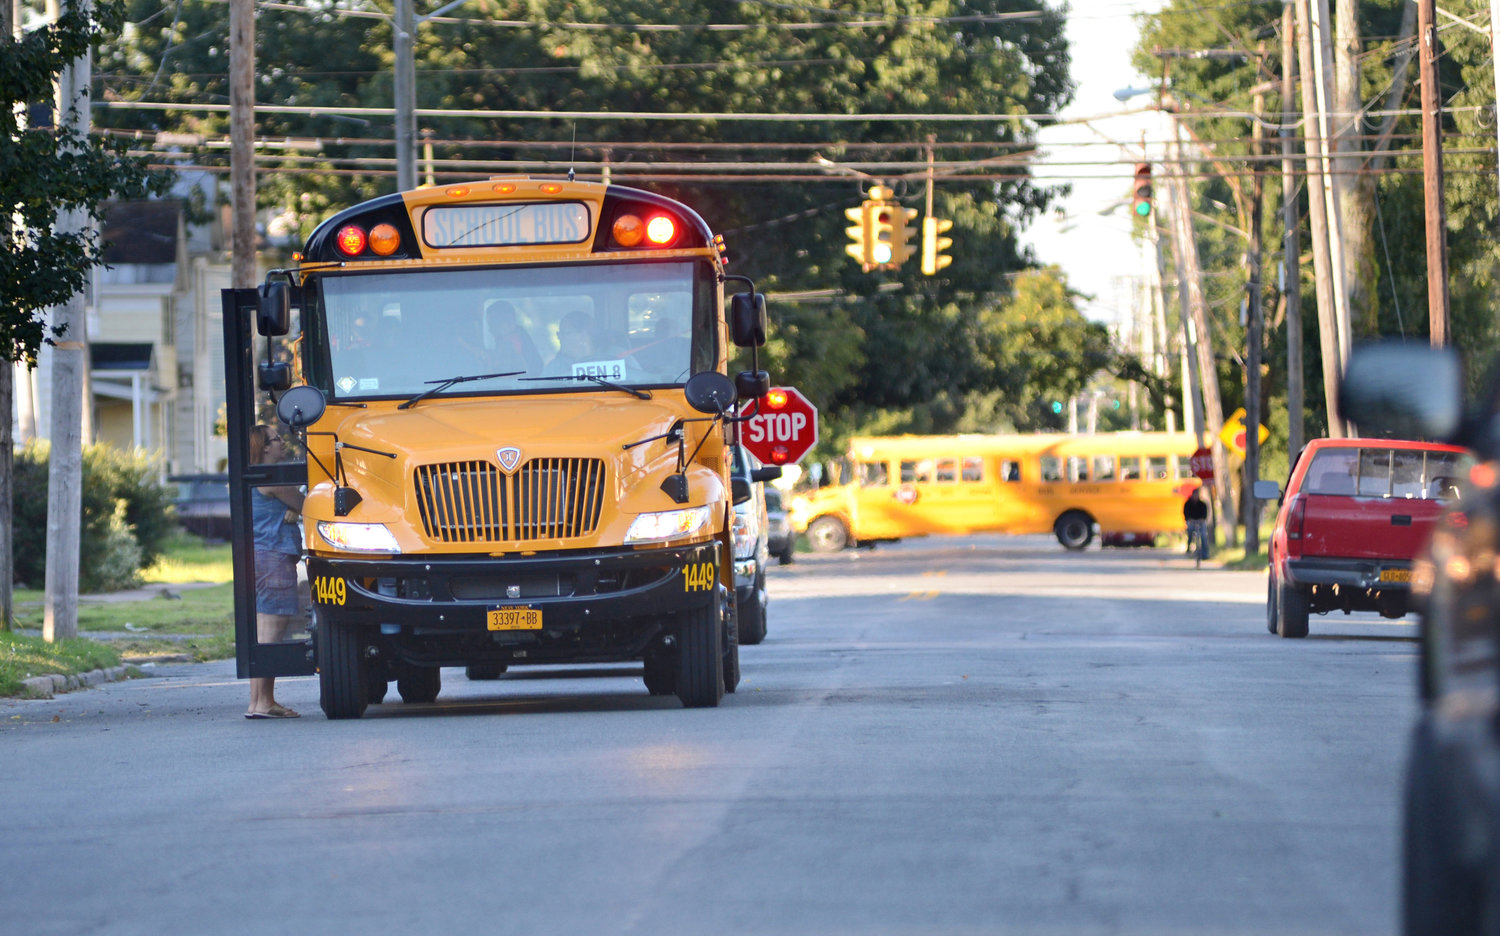 SOME SCHEDULES RELEASED — The Rome City School District has released bus schedules for Rome Free Academy and Strough Middle School students via a listing on the district’s website. Elementary school schedules have been delayed by the relocation of students from the now-closed Staley Elementary School. Elementary routes will be released next week, according to district officials.